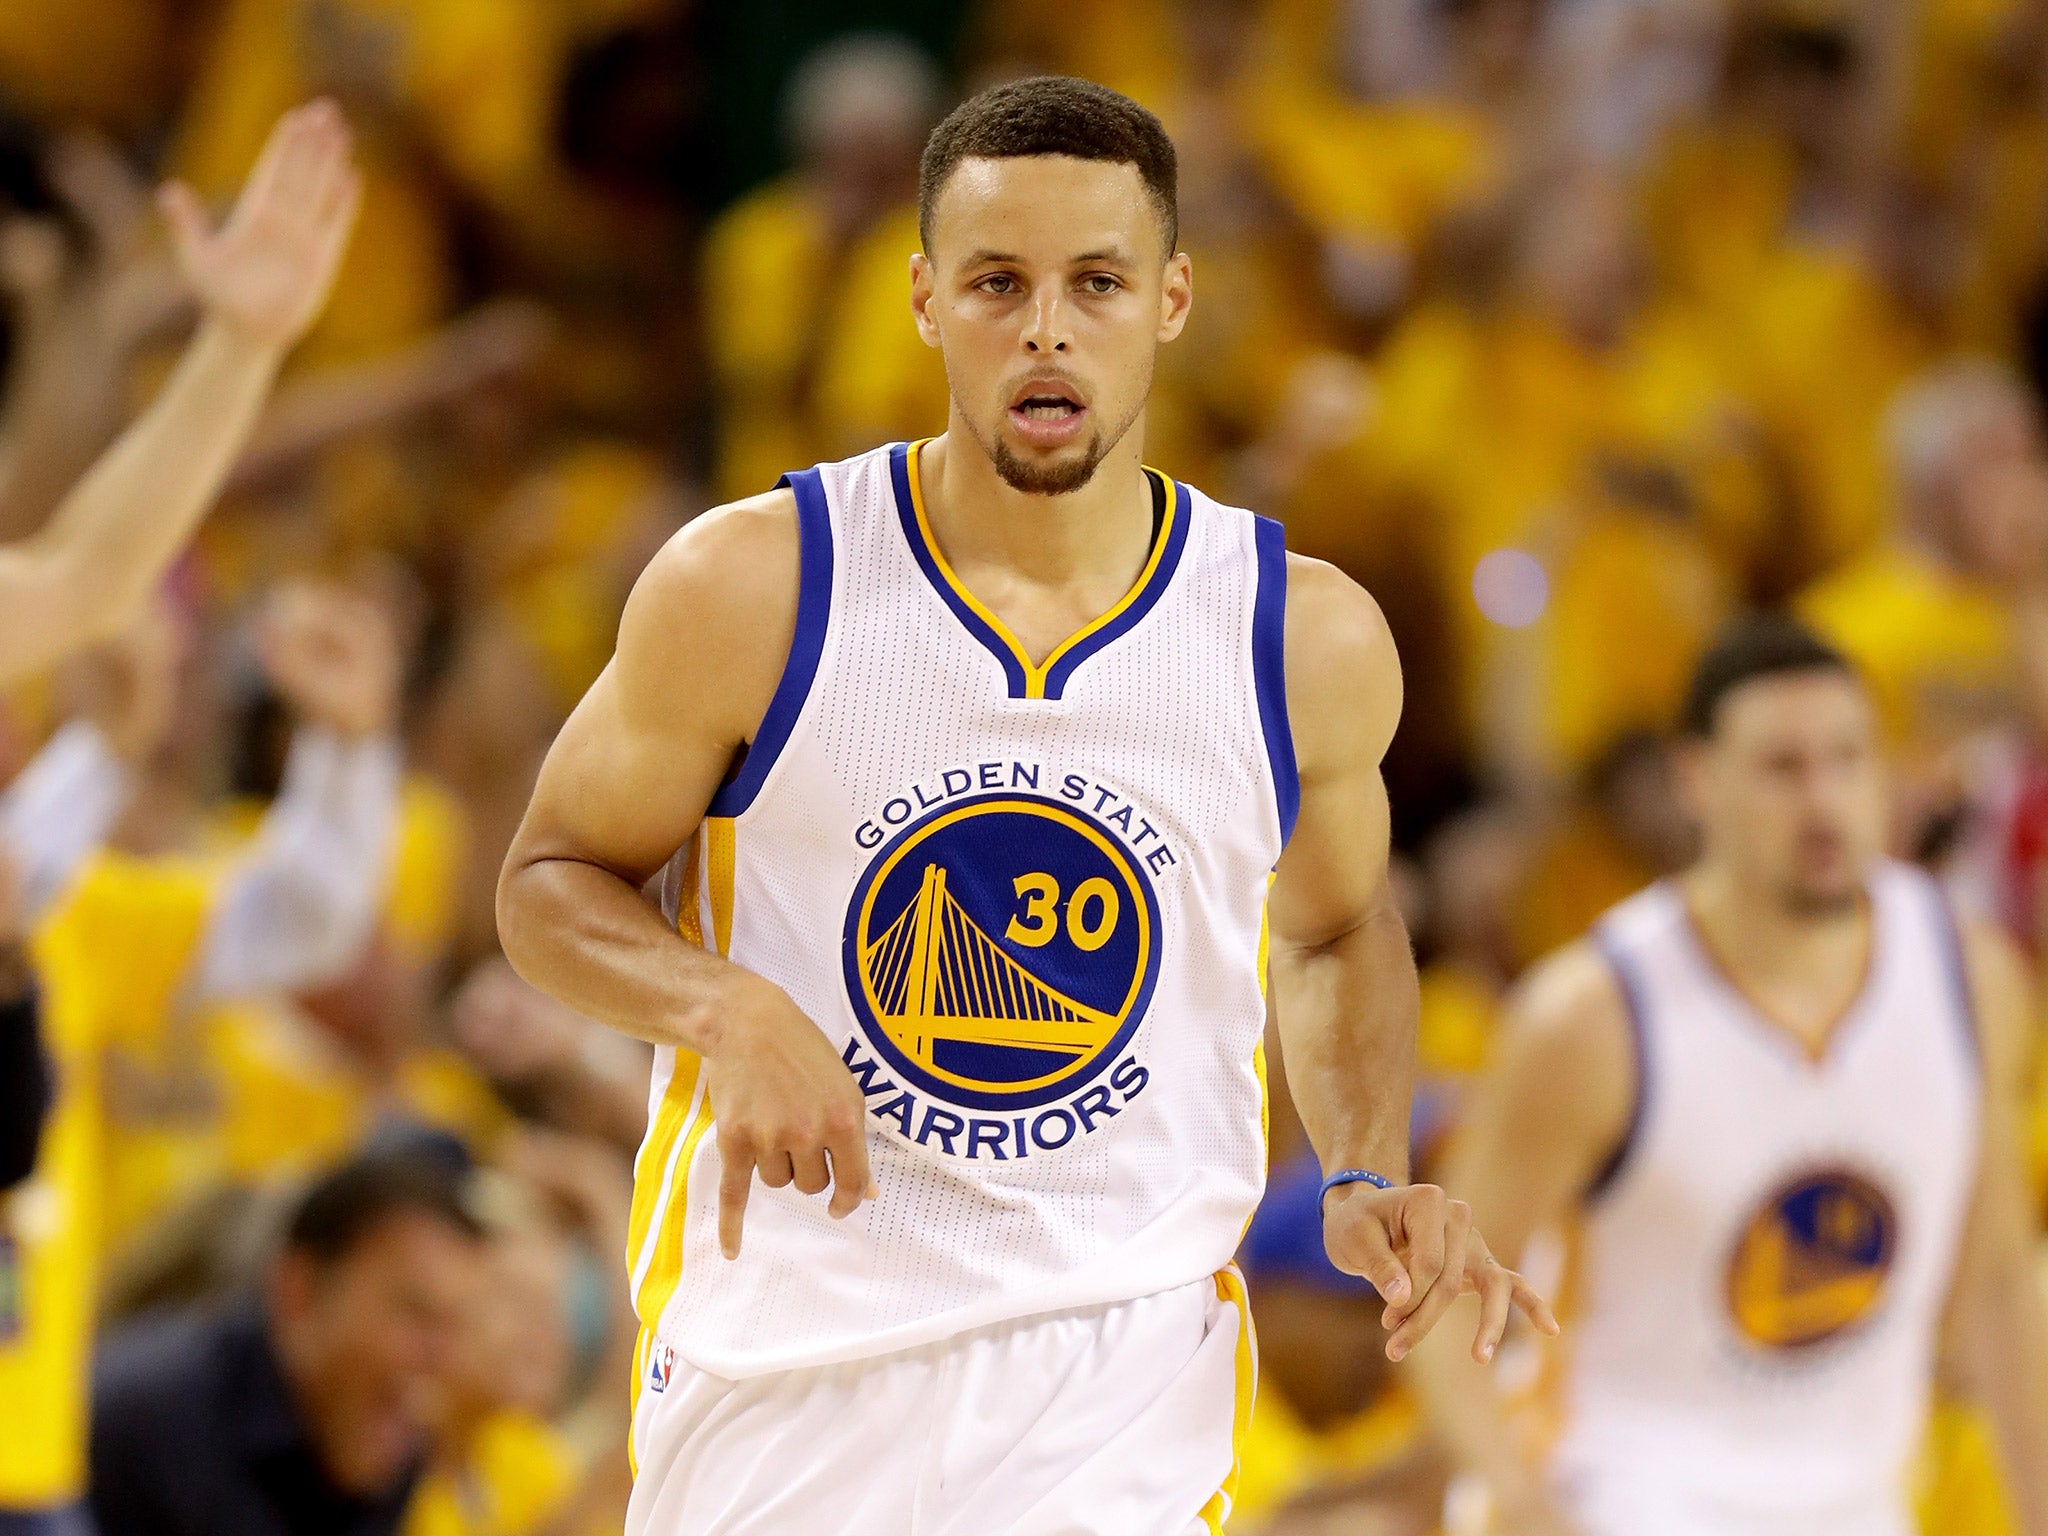 Steph Curry was named MVP despite playing just 25 minutes